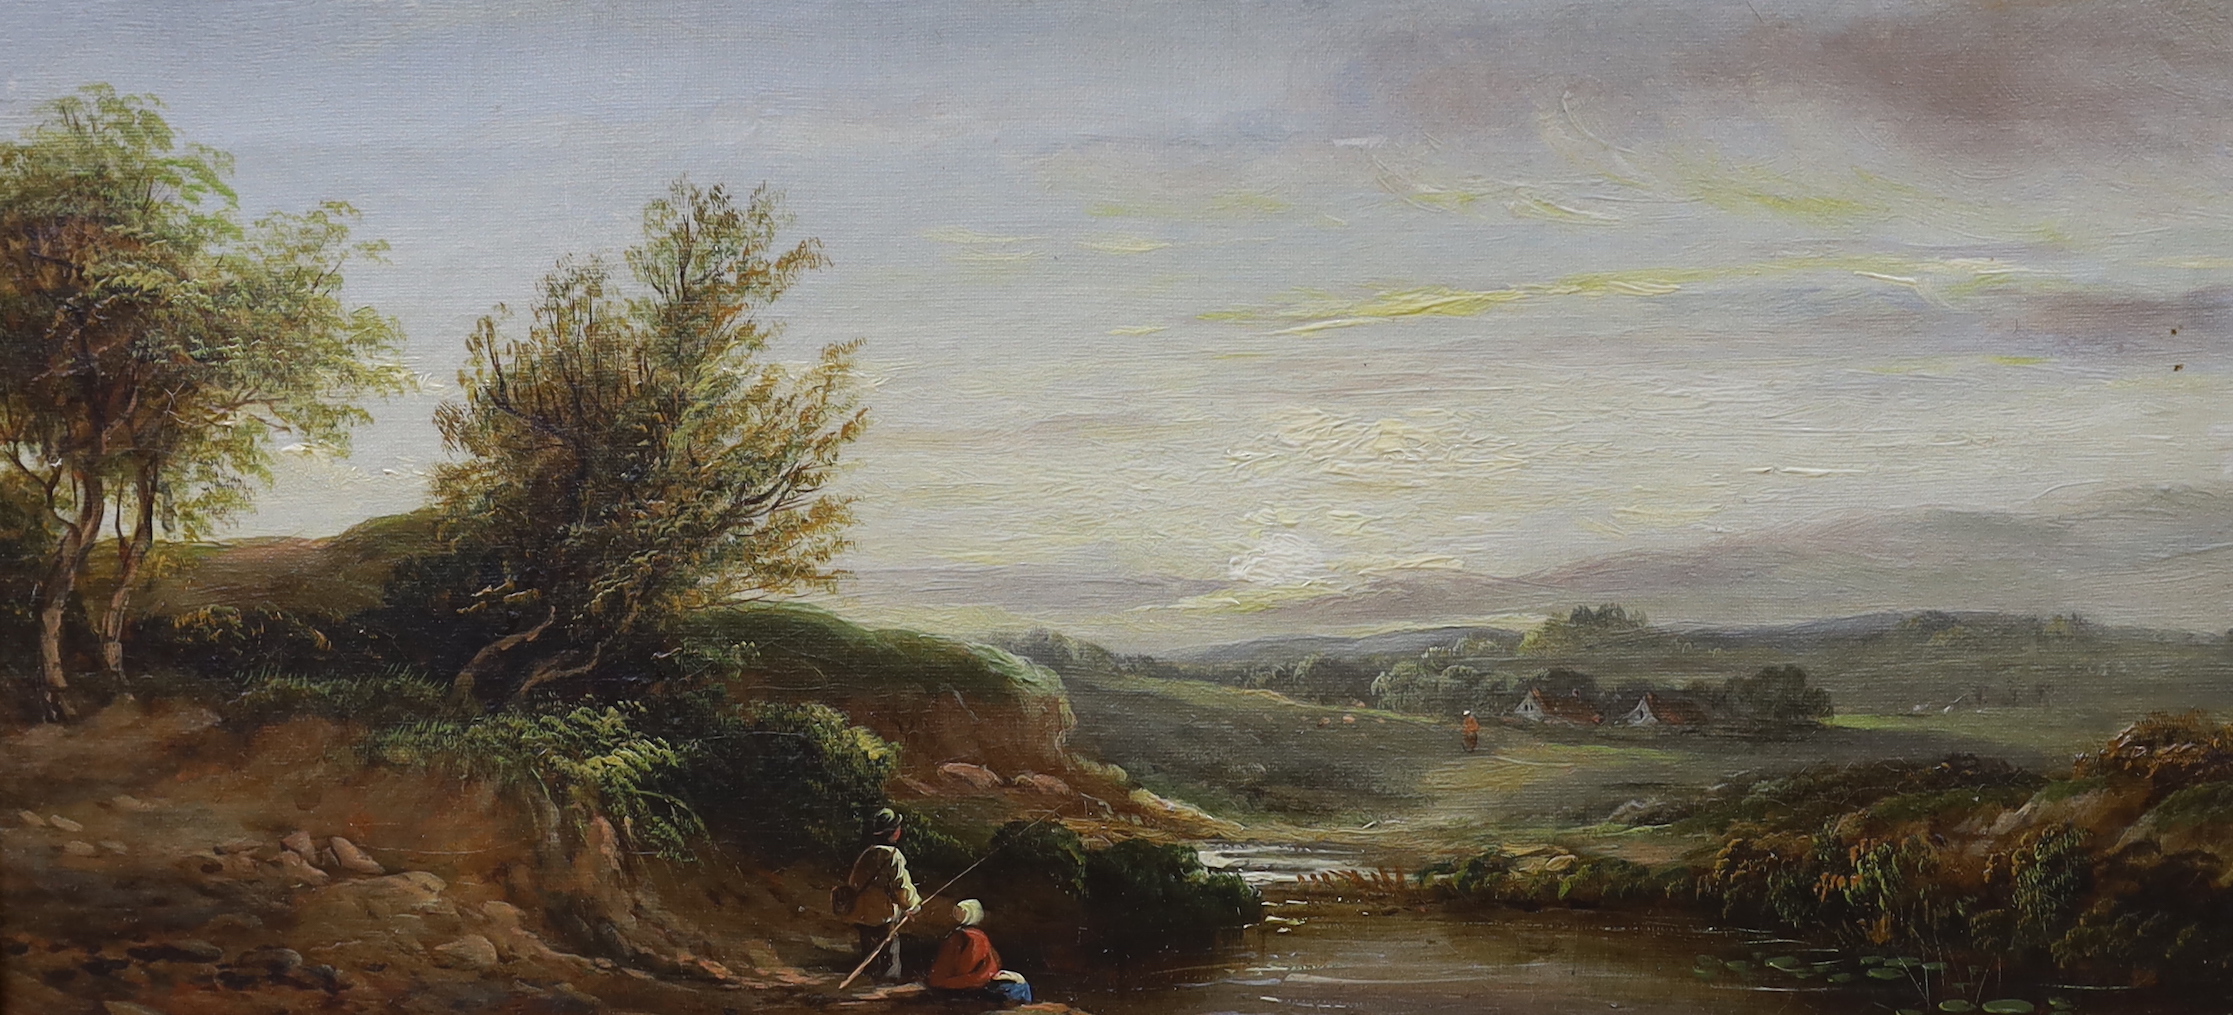 Attributed to Edwin Buttery (1839-1908), pair of oils on canvas, River landscapes with figures fishing, 19 x 39cm